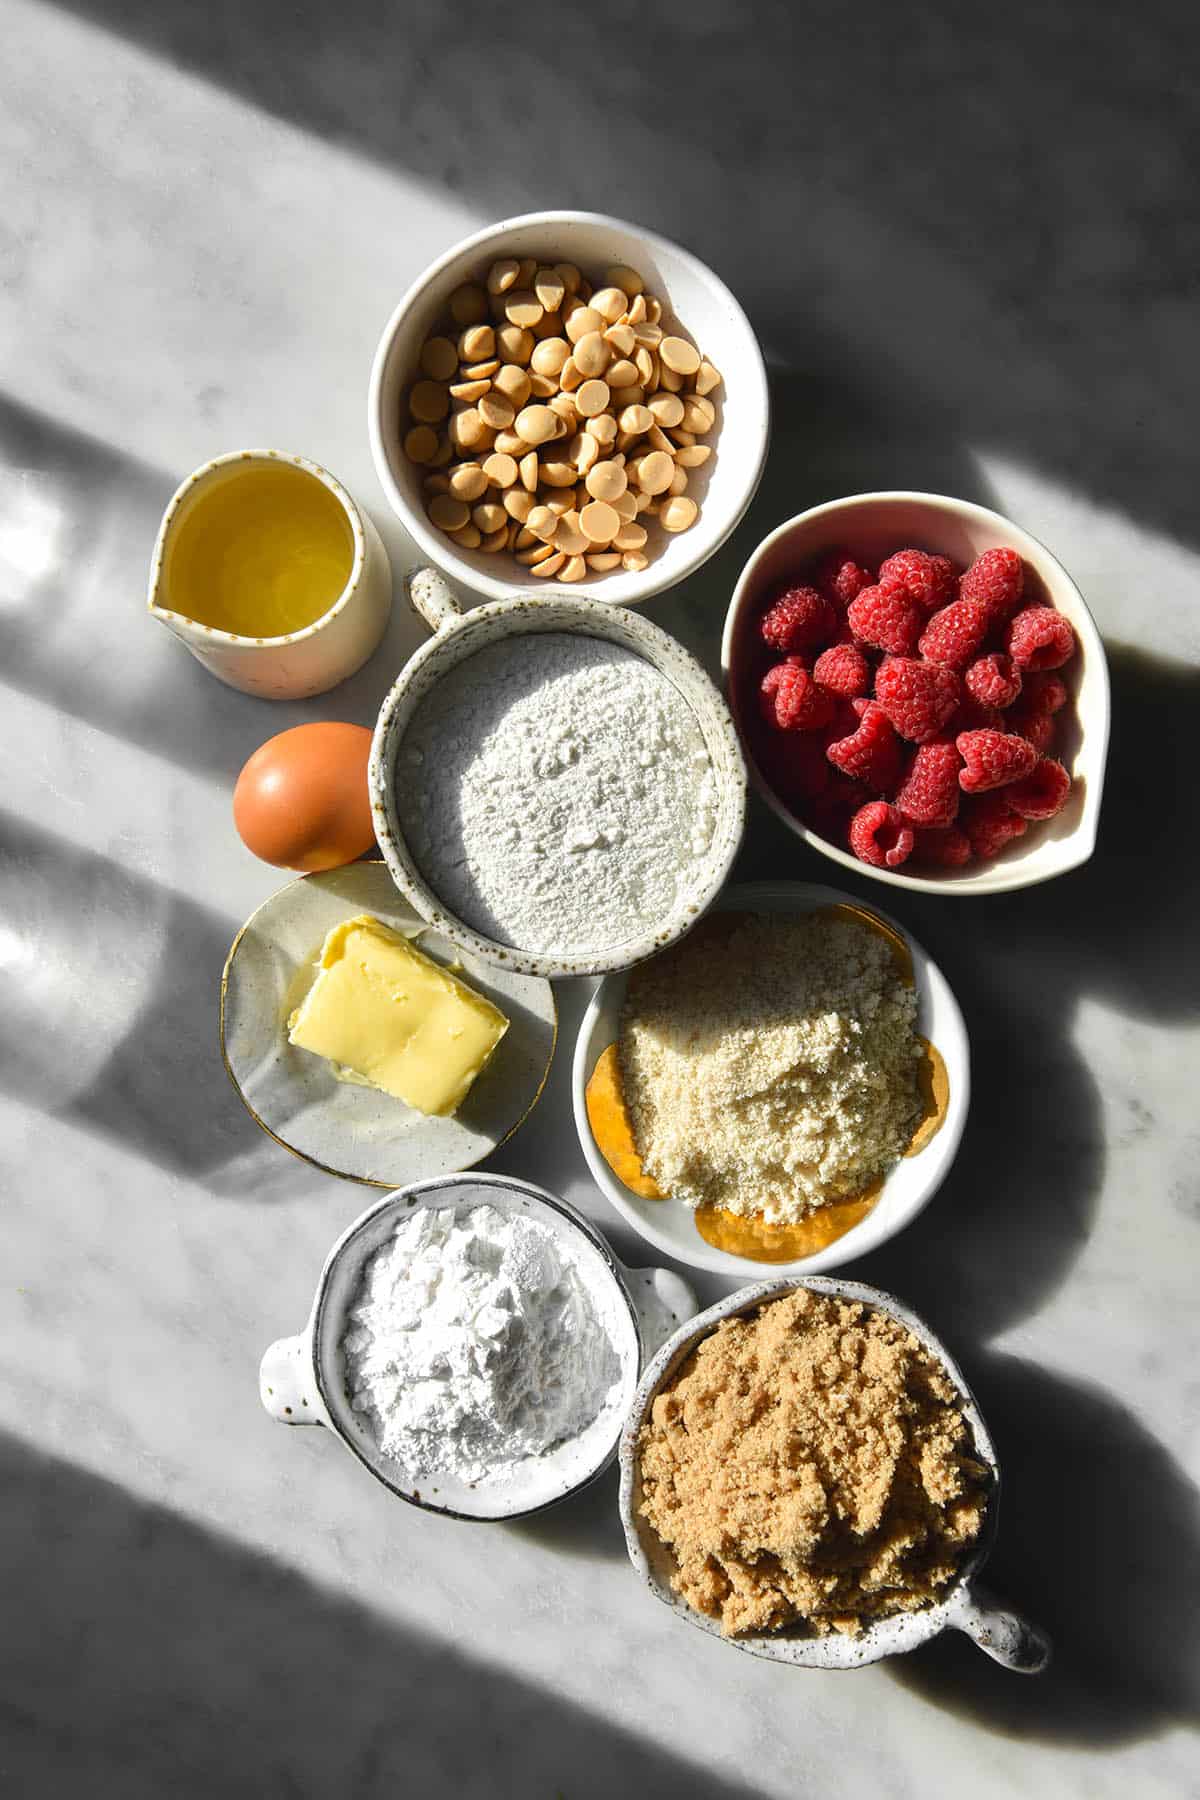 A moody contrasting sunlight image of the ingredients used for gluten free raspberry muffins on a white marble table. The ingredients are arranged in the centre of the table in white marble pinch bowls and two glasses of water sit off to the left side